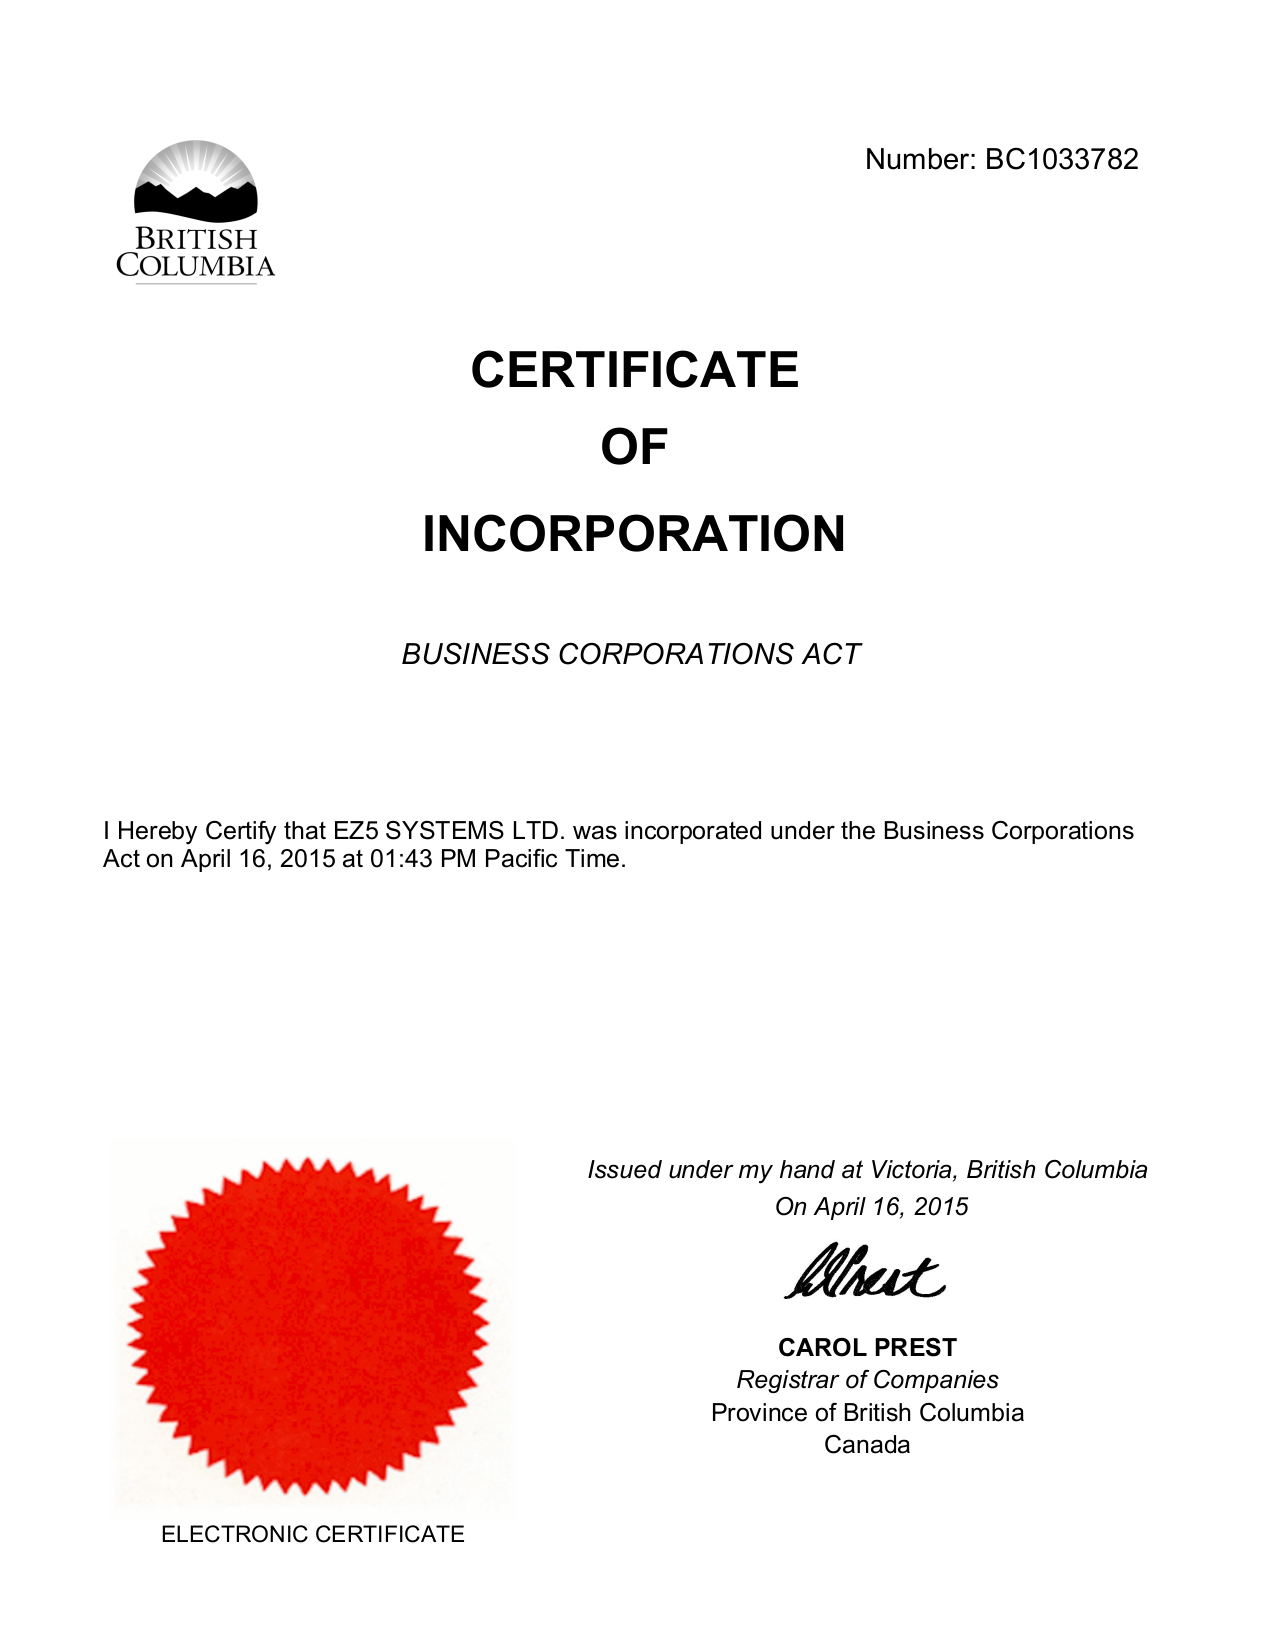 EZ5 Systems - Business License